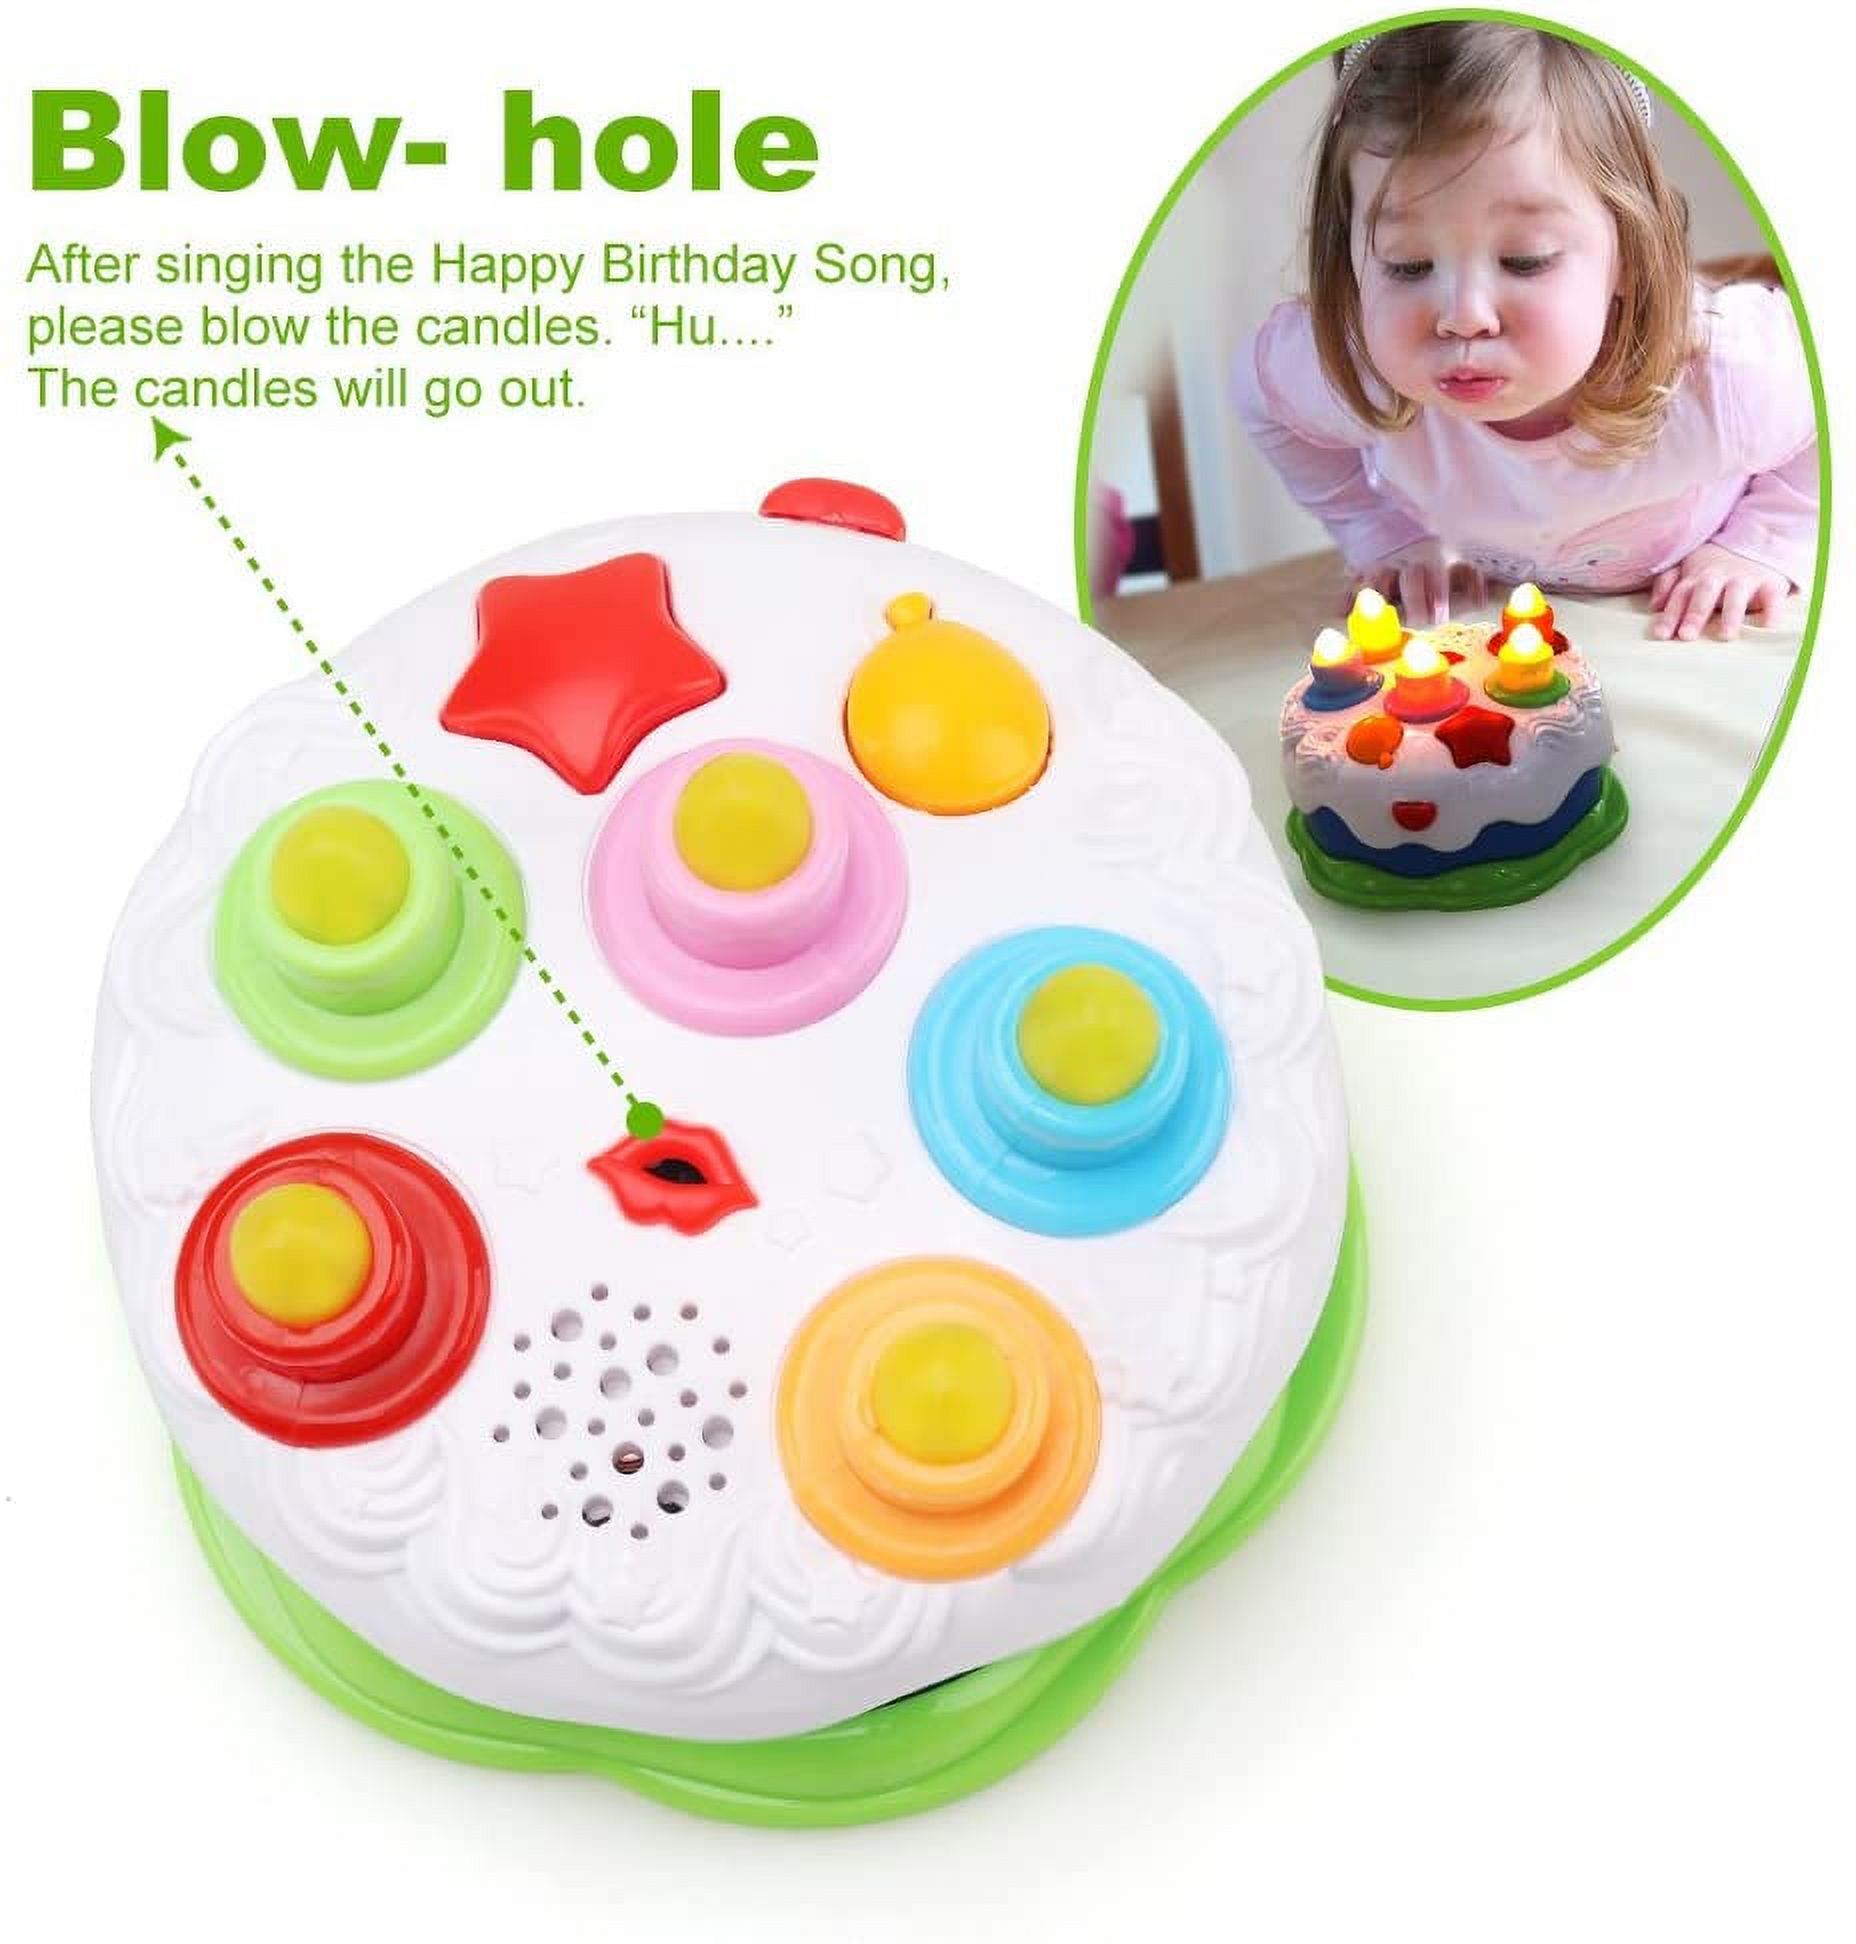 Kids Birthday Cake Toy for Baby & Toddlers with Counting Candles & Music, Gift Toys for 1 2 3 4 5 Years Old Boys and Girls - image 3 of 9